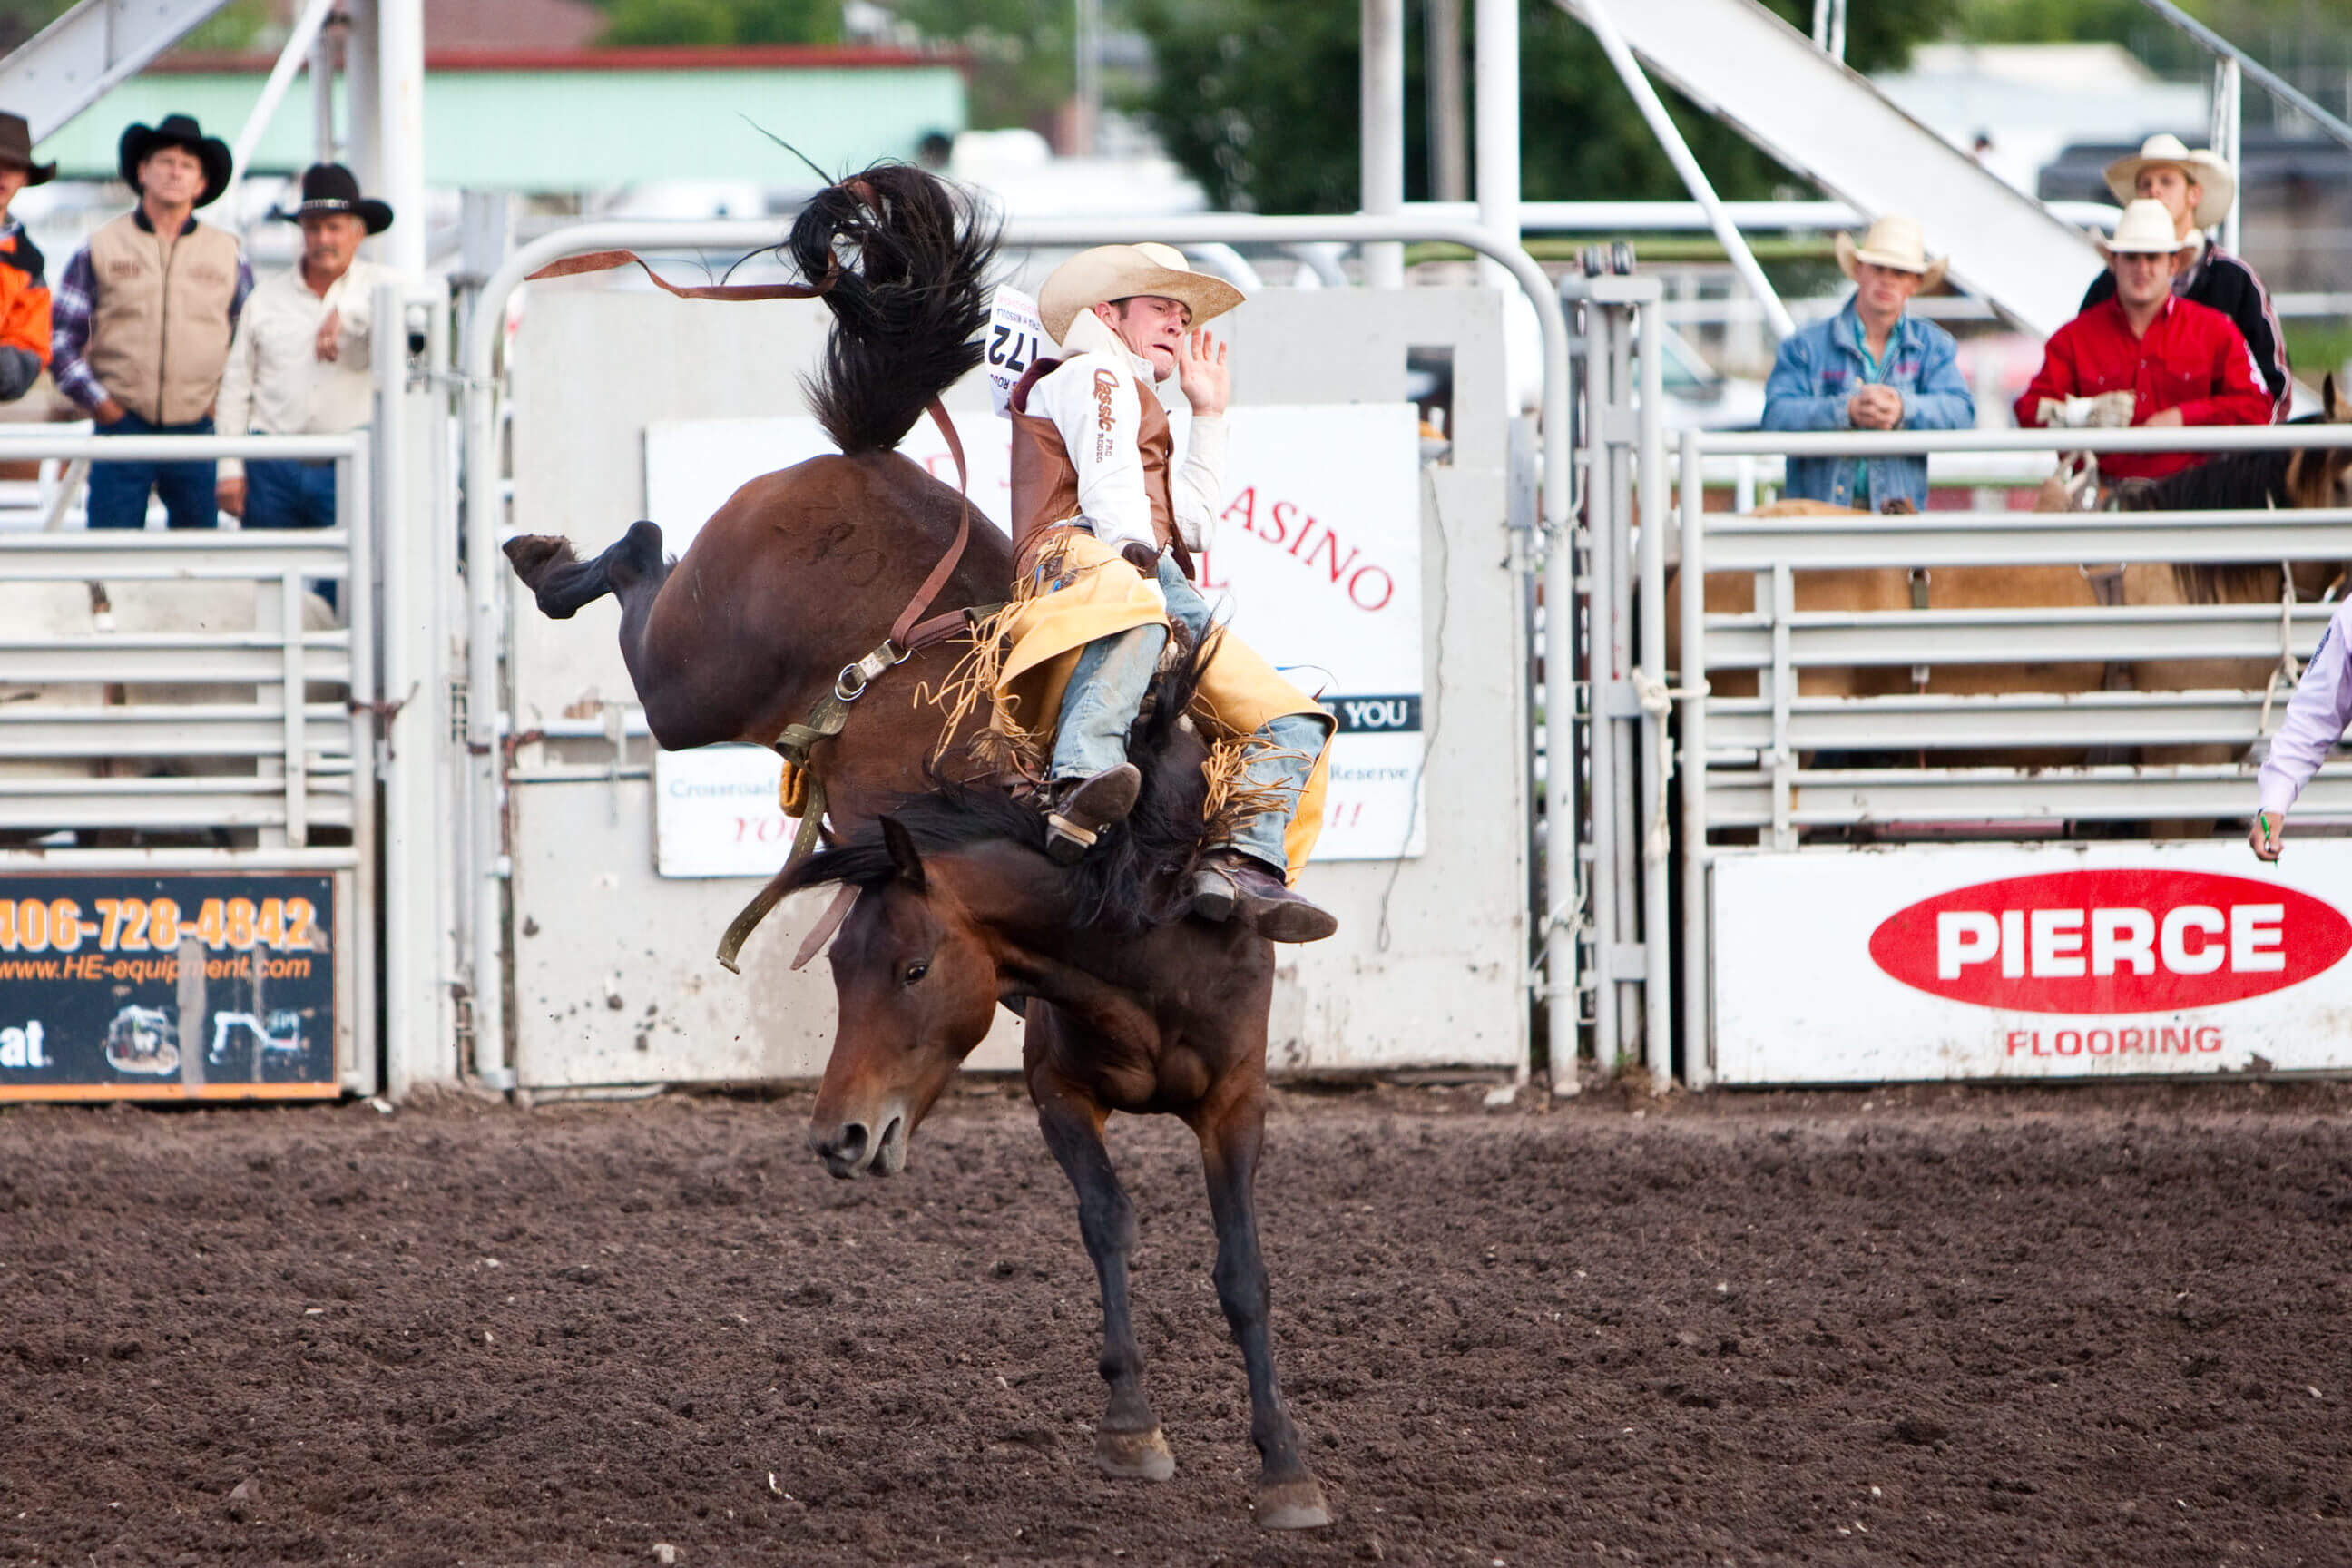 A cowboy competes on a bucking bronco during a rodeo at the Western Montana State Fair in Missoula Montana